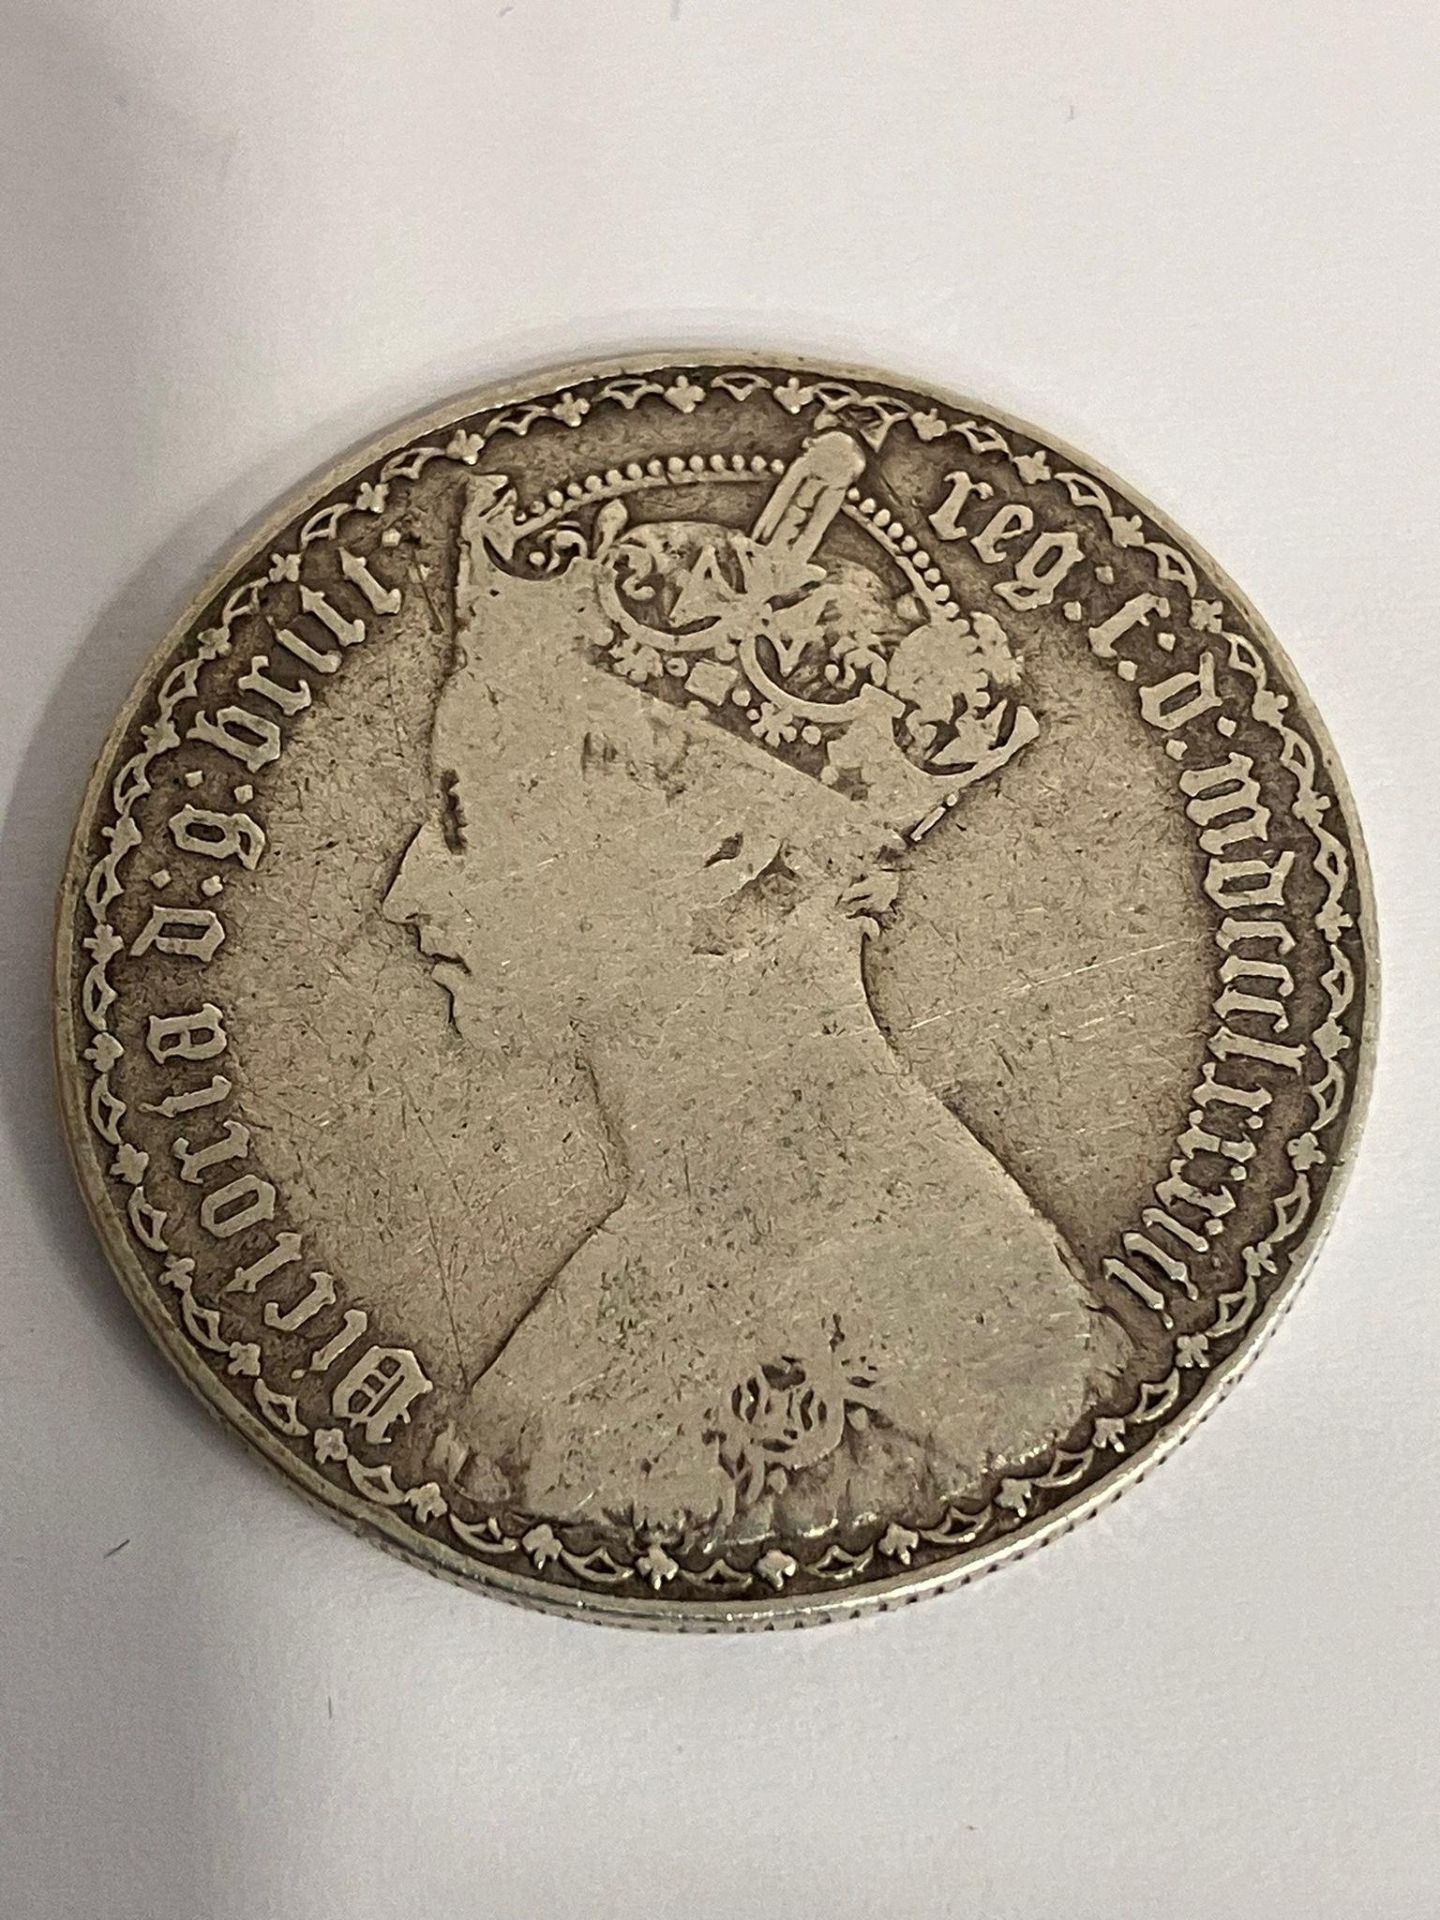 1883 SILVER GOTHIC FLORIN. Very fine/extra fine condition. - Image 2 of 3